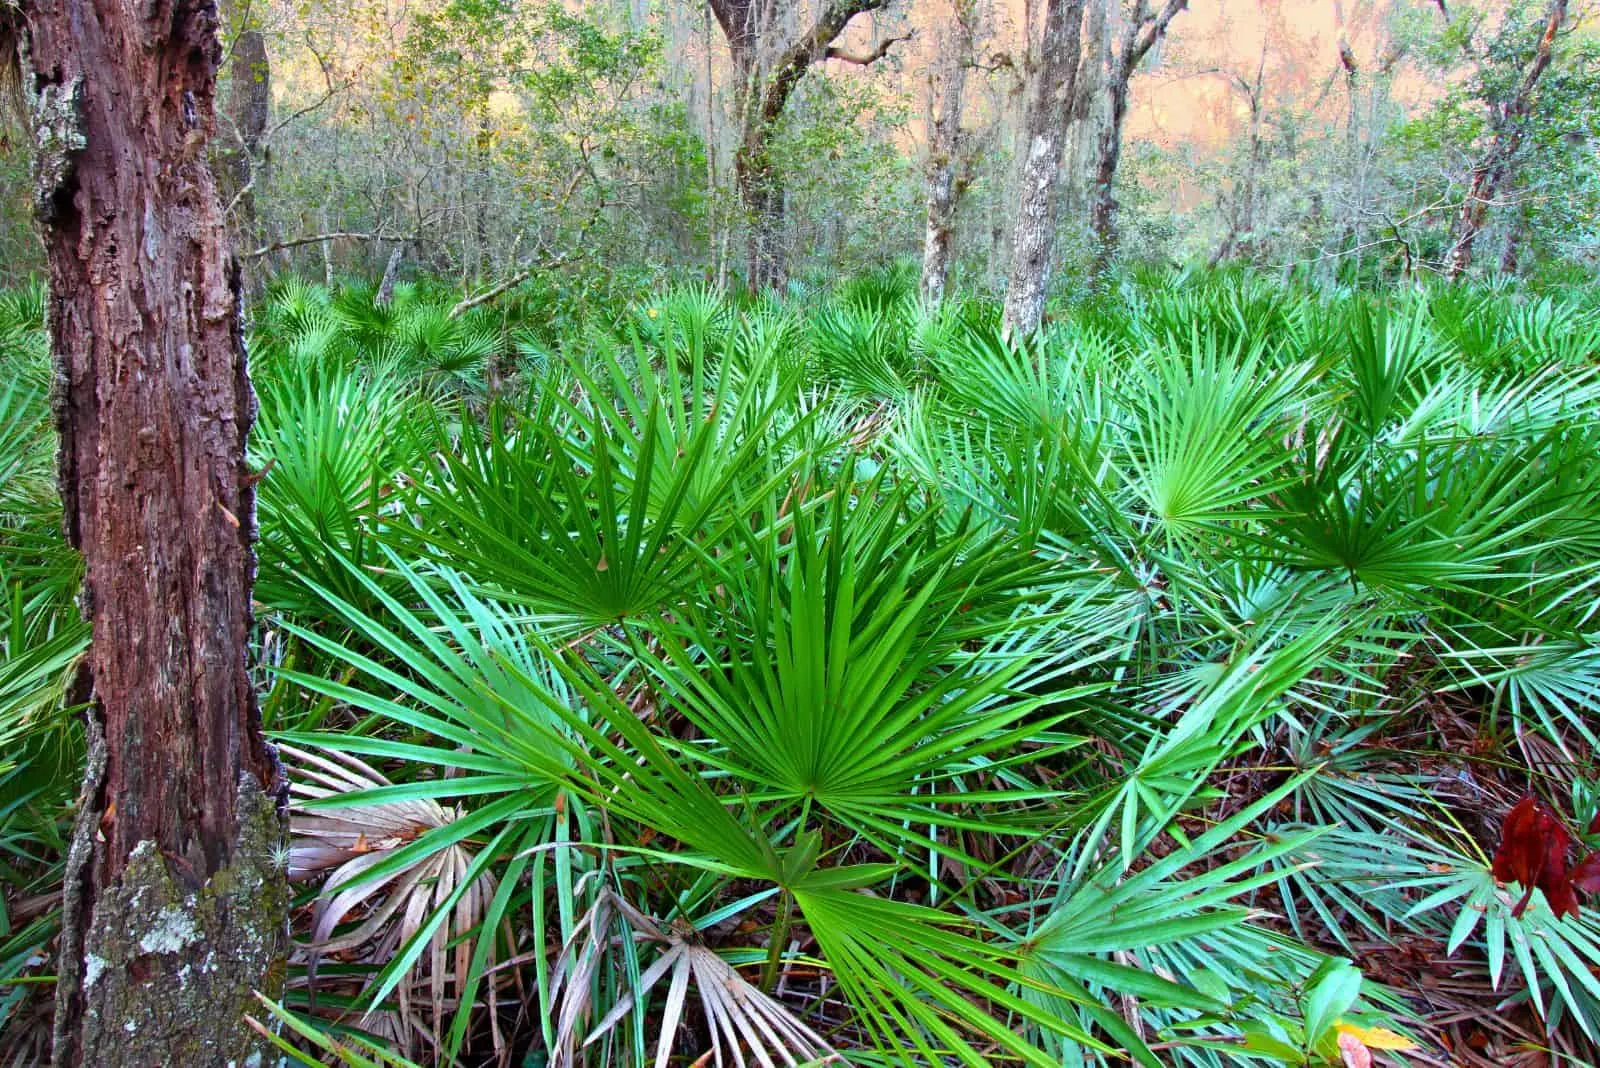 Saw Palmetto Palm in the forest